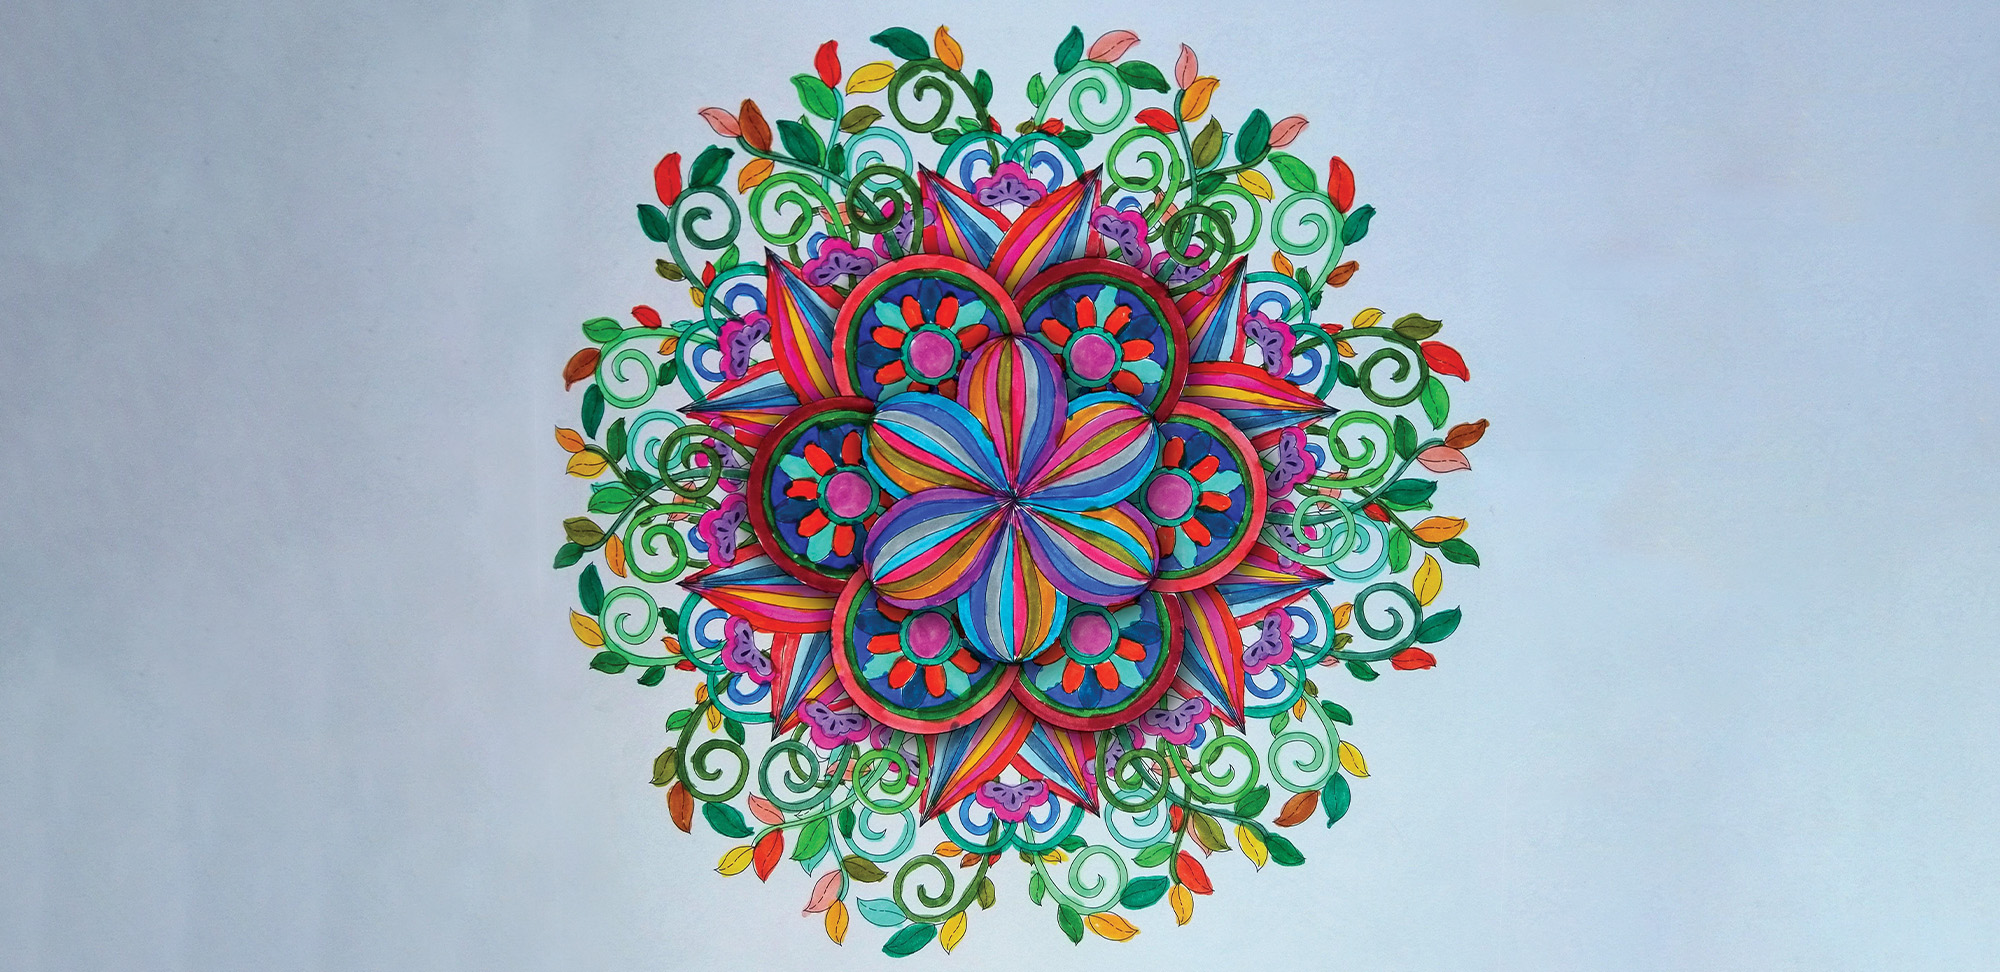 Painted Mandala created by Kerry Black from Express Yourself in Colour colouring book